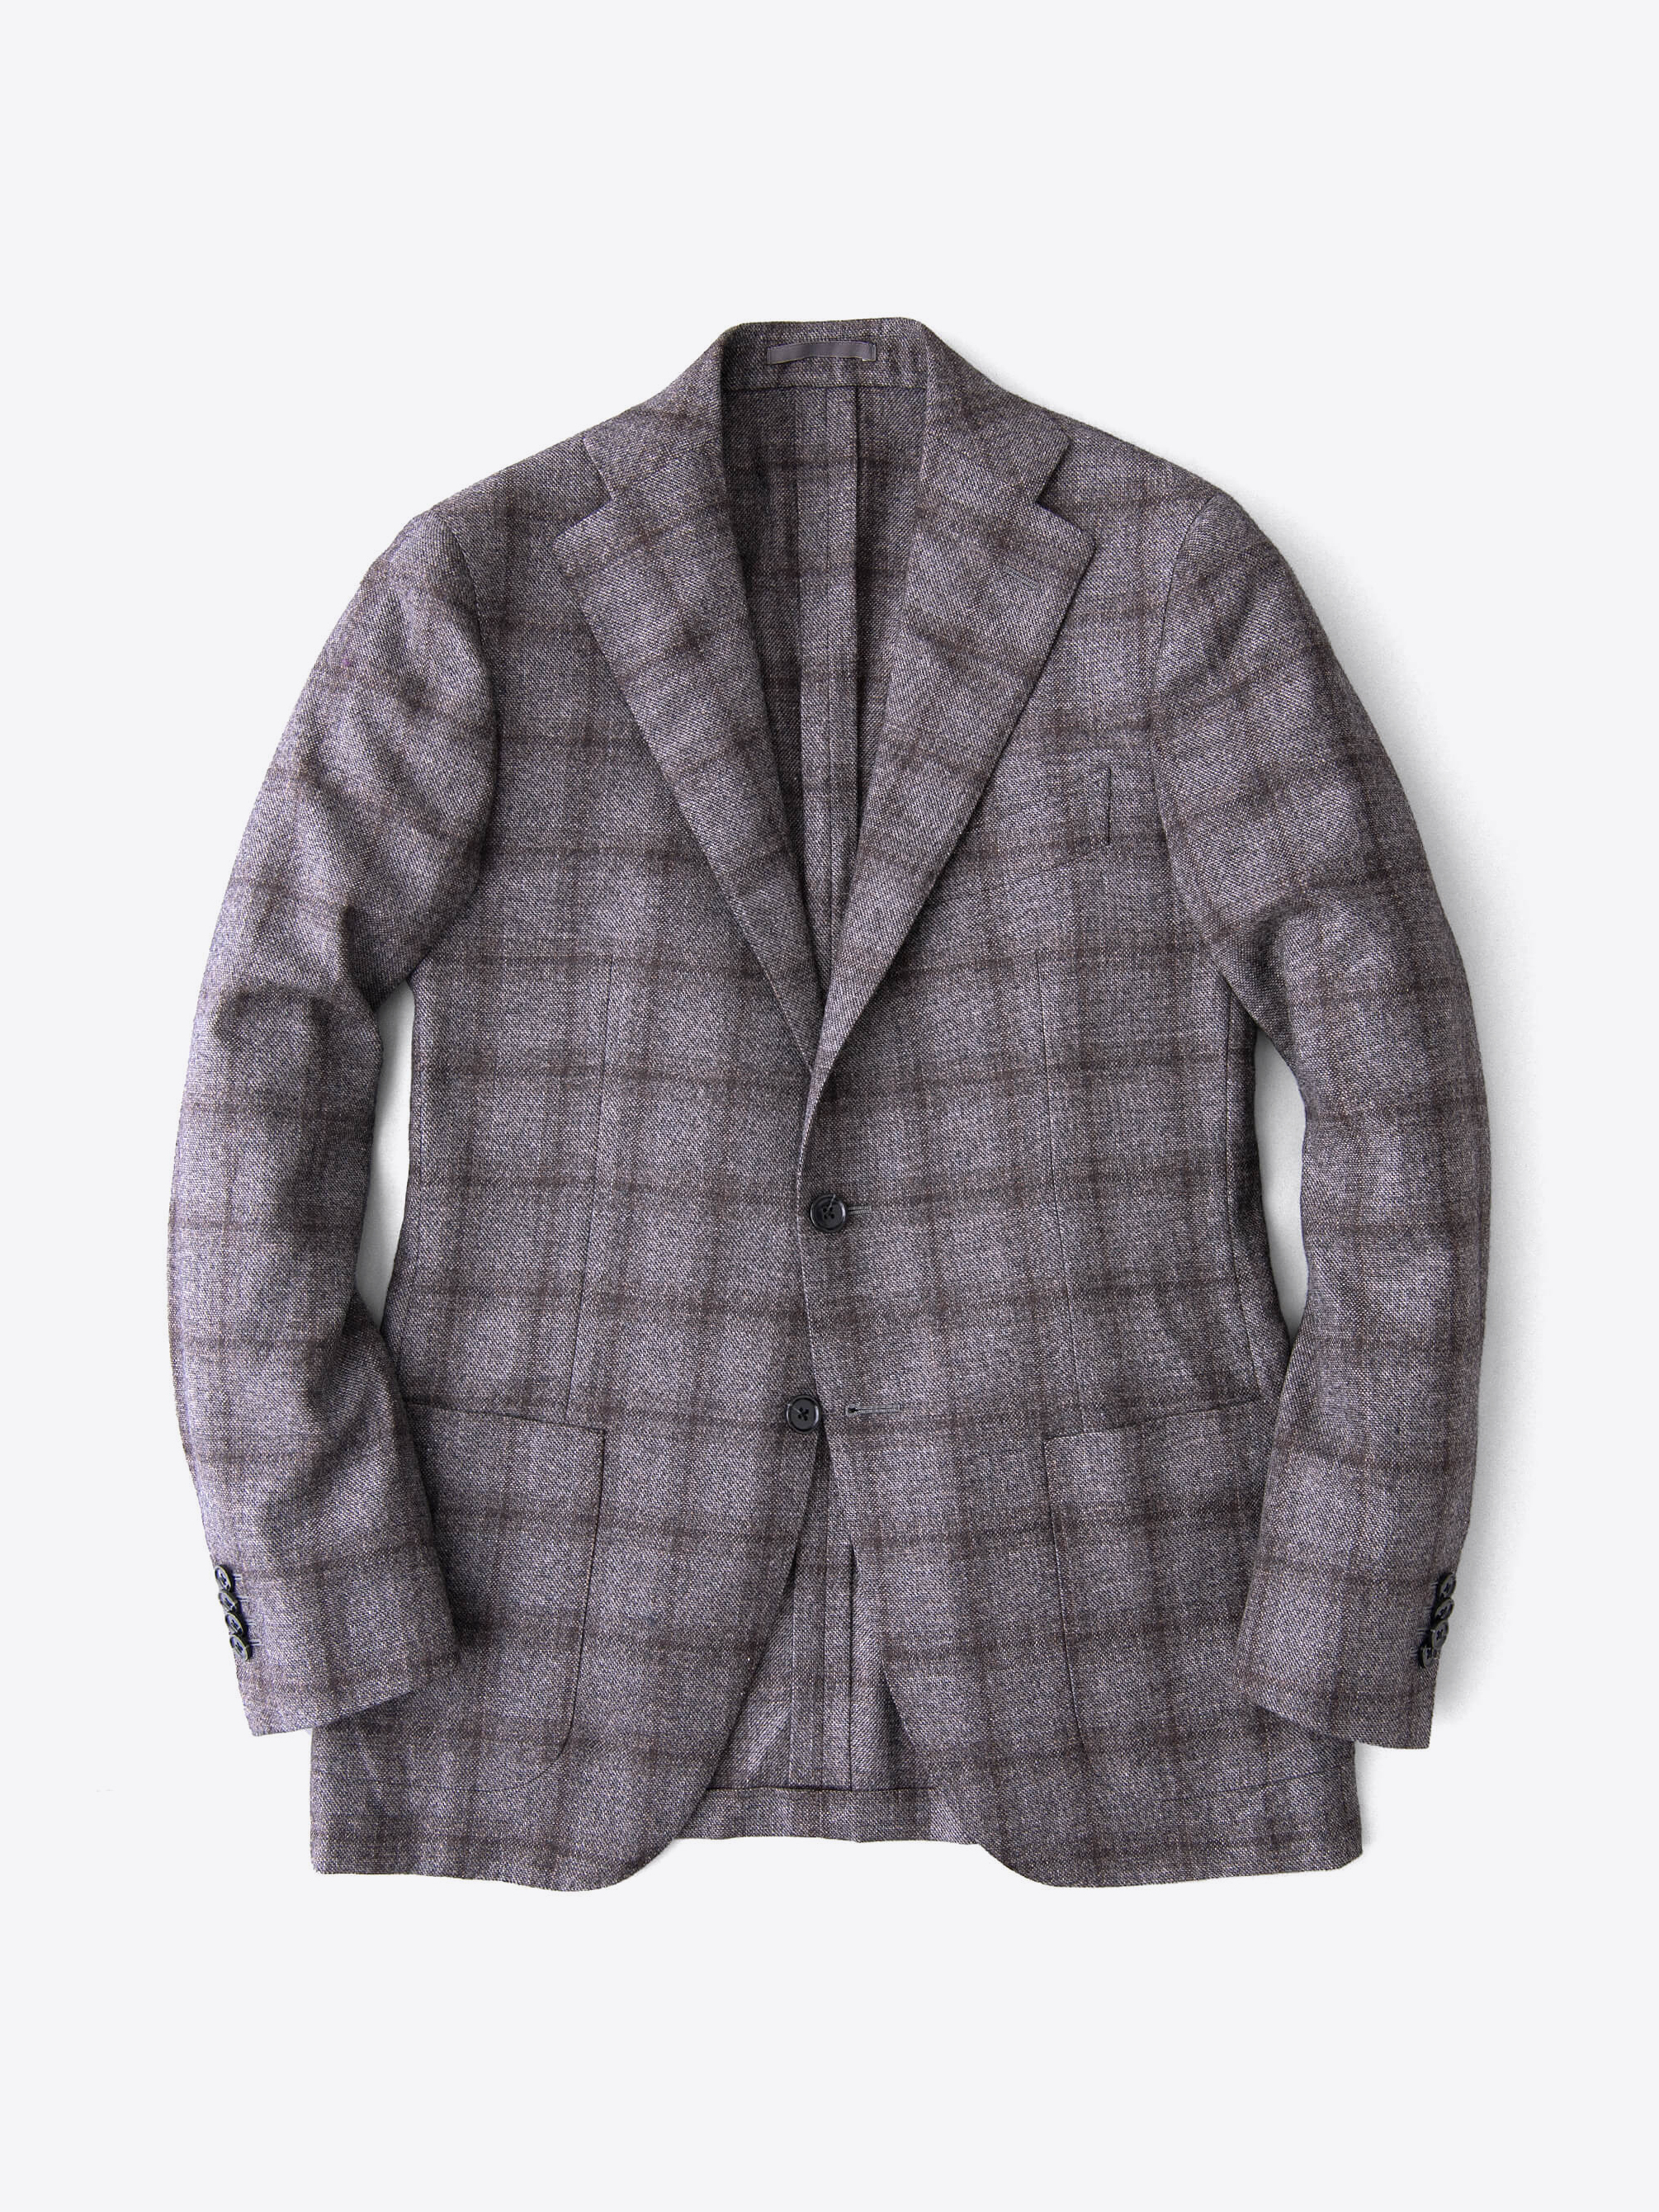 Zoom Image of Hudson Grey Plaid Wool and Cashmere Flannel Jacket